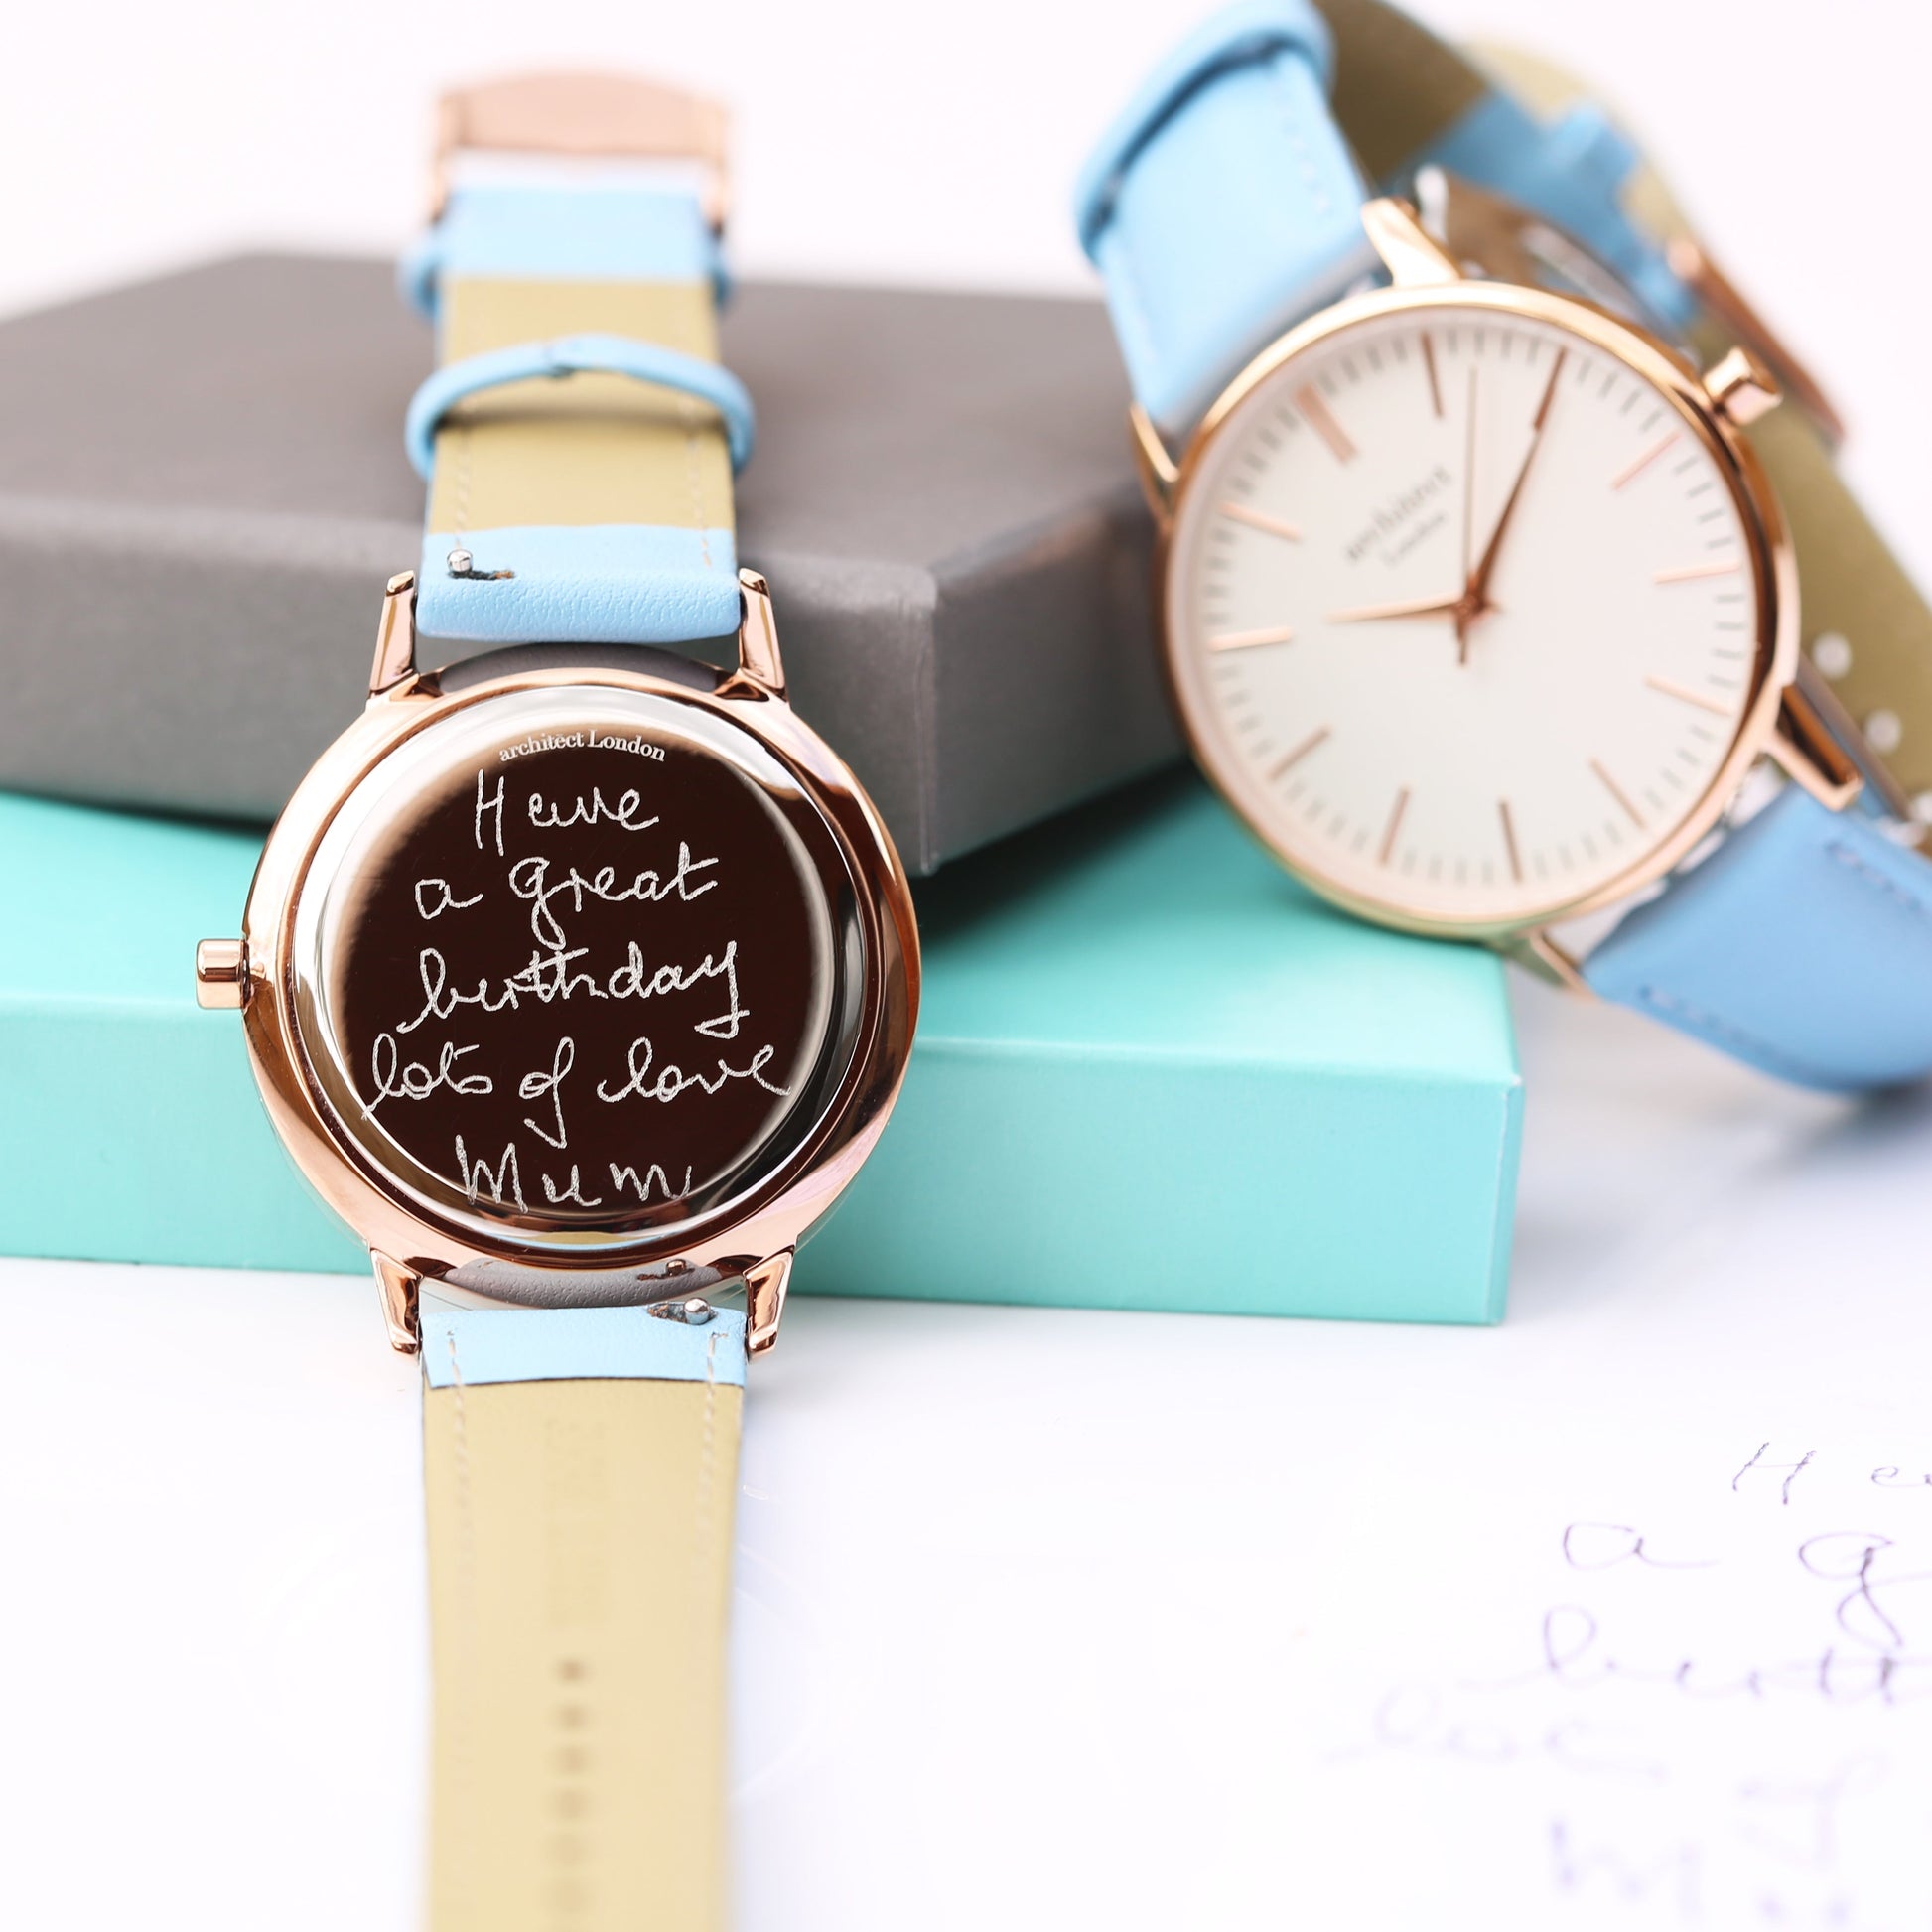 Personalized Ladies' Watches - Ladies Handwriting Engraved Watch in Light Blue 